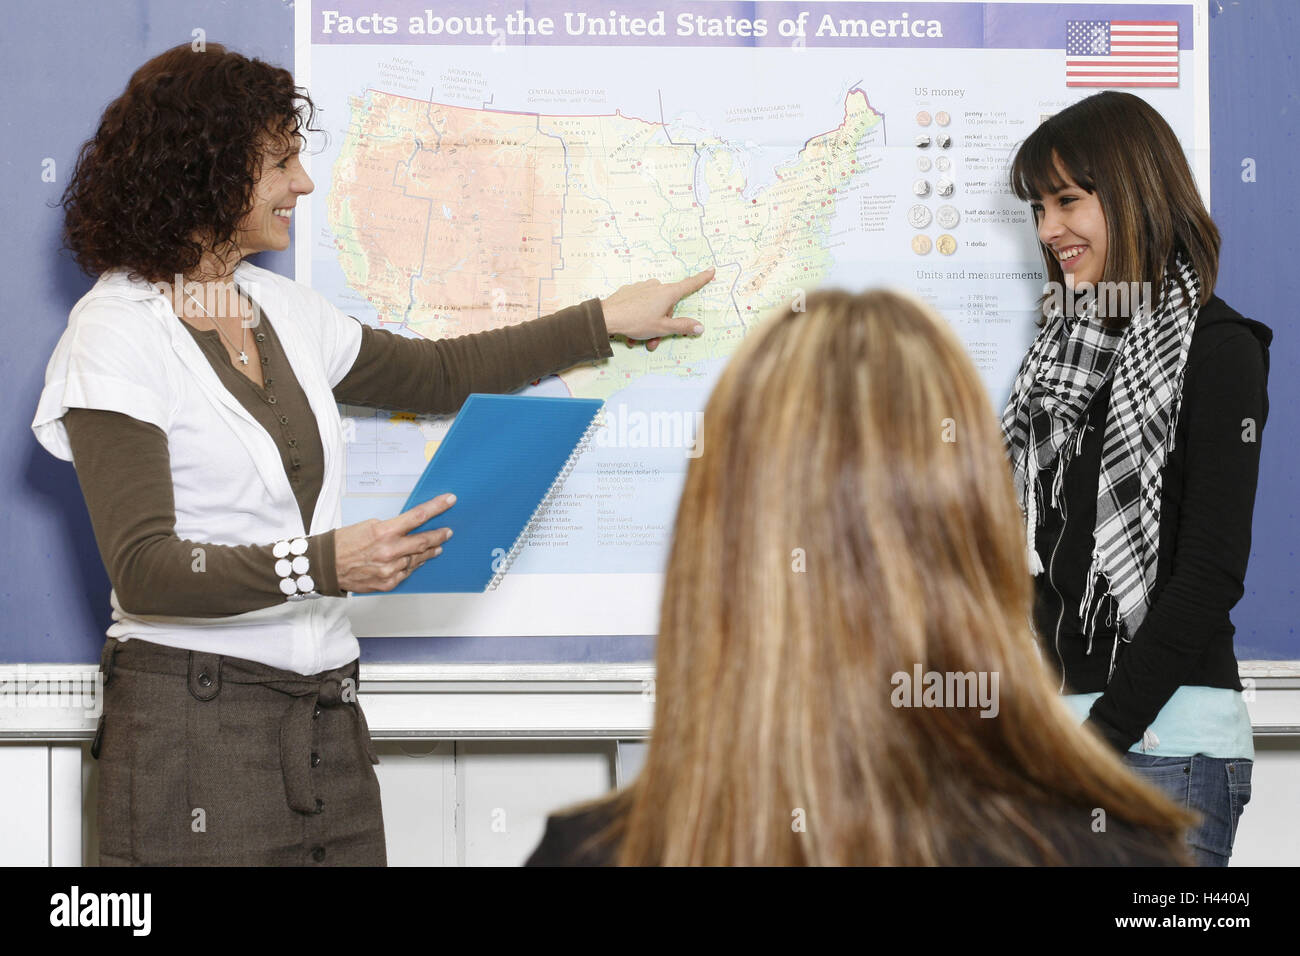 Classrooms, lessons, teacher, map, schoolgirl, point, smile, model released, school, school lessons, teenager, girl, woman, person, eye contact, stand, declare, happy, friendly, card, the USA, geography, education, school education, general education, learning atmosphere, Stock Photo